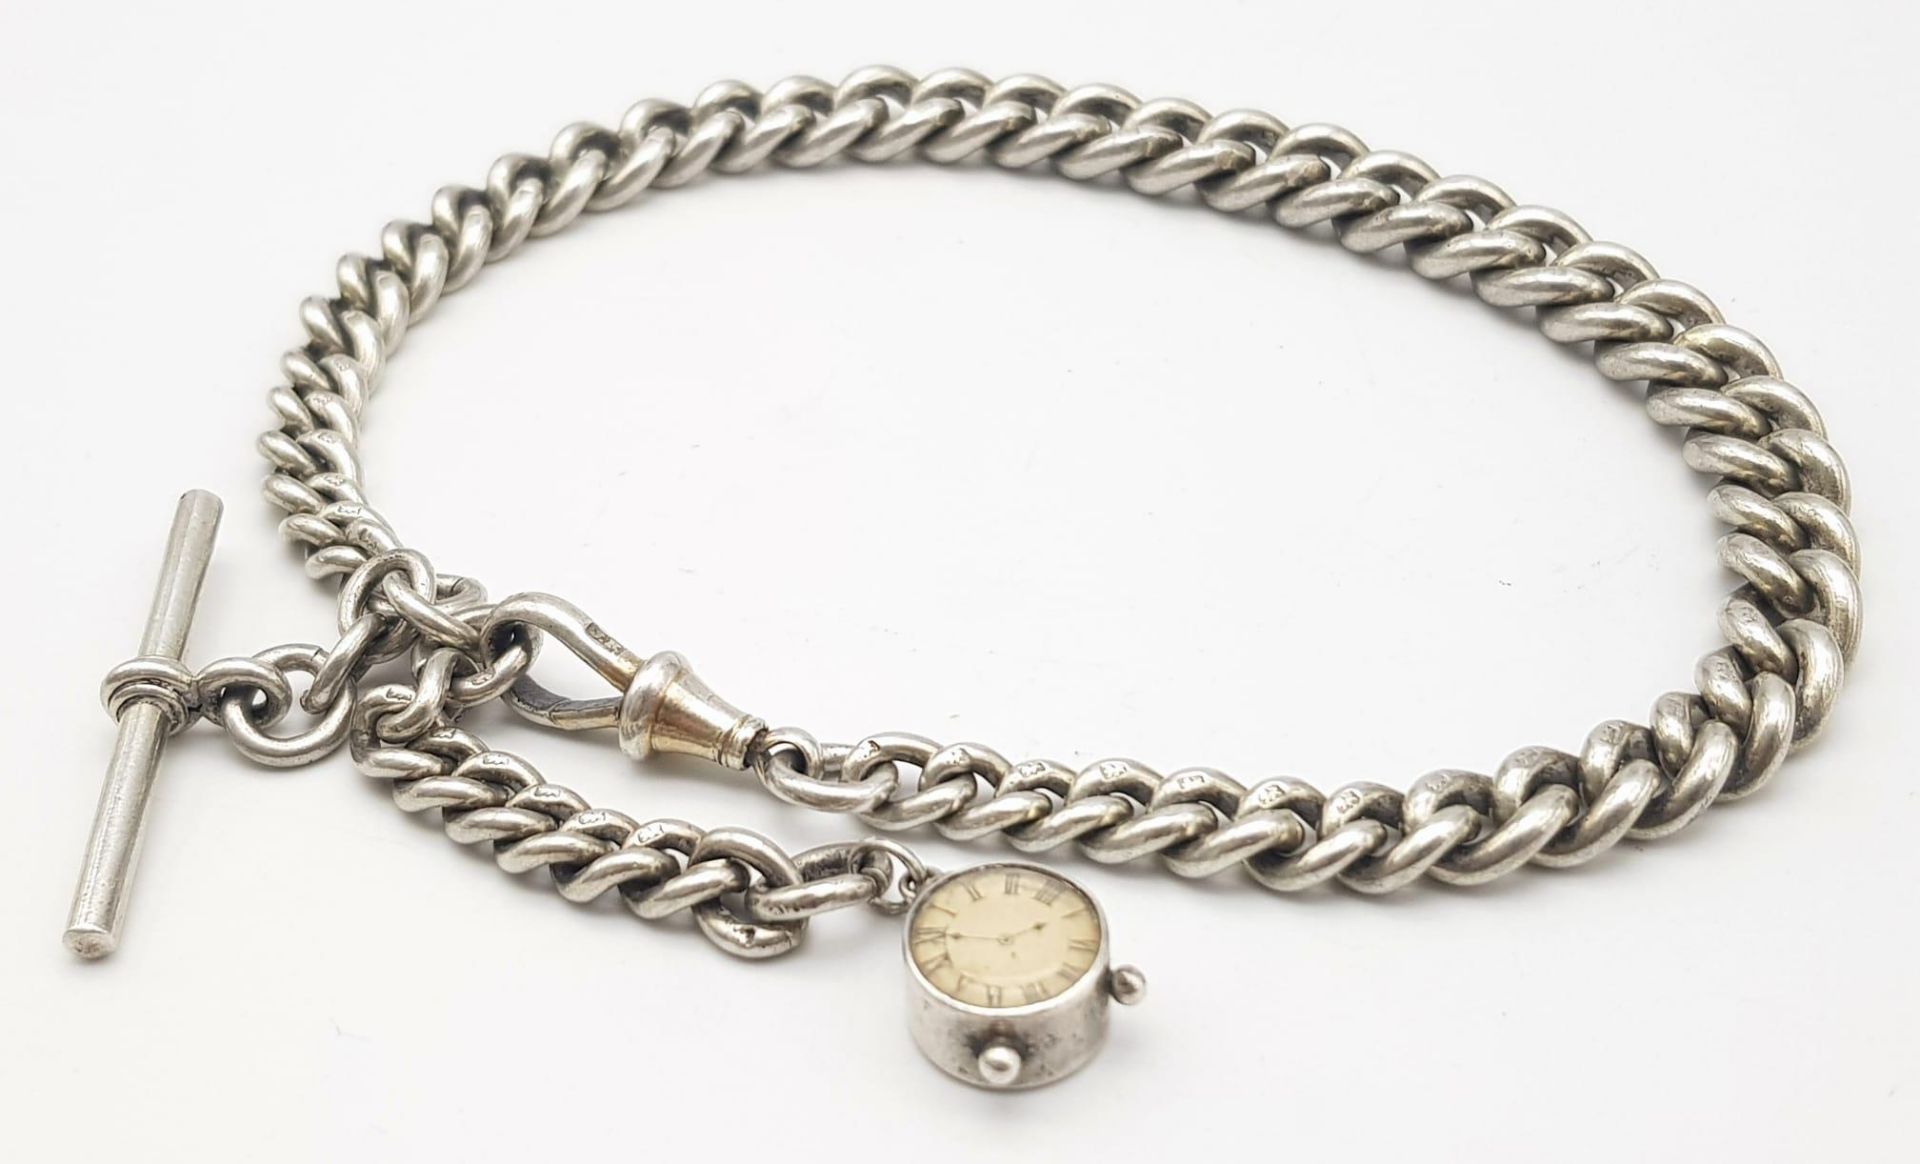 A VINTAGE STERLING SILVER ALBERT POCKET WATCH CHAIN WITH T BAR AND ALSO A CUTE MINI CLOCK CHARM